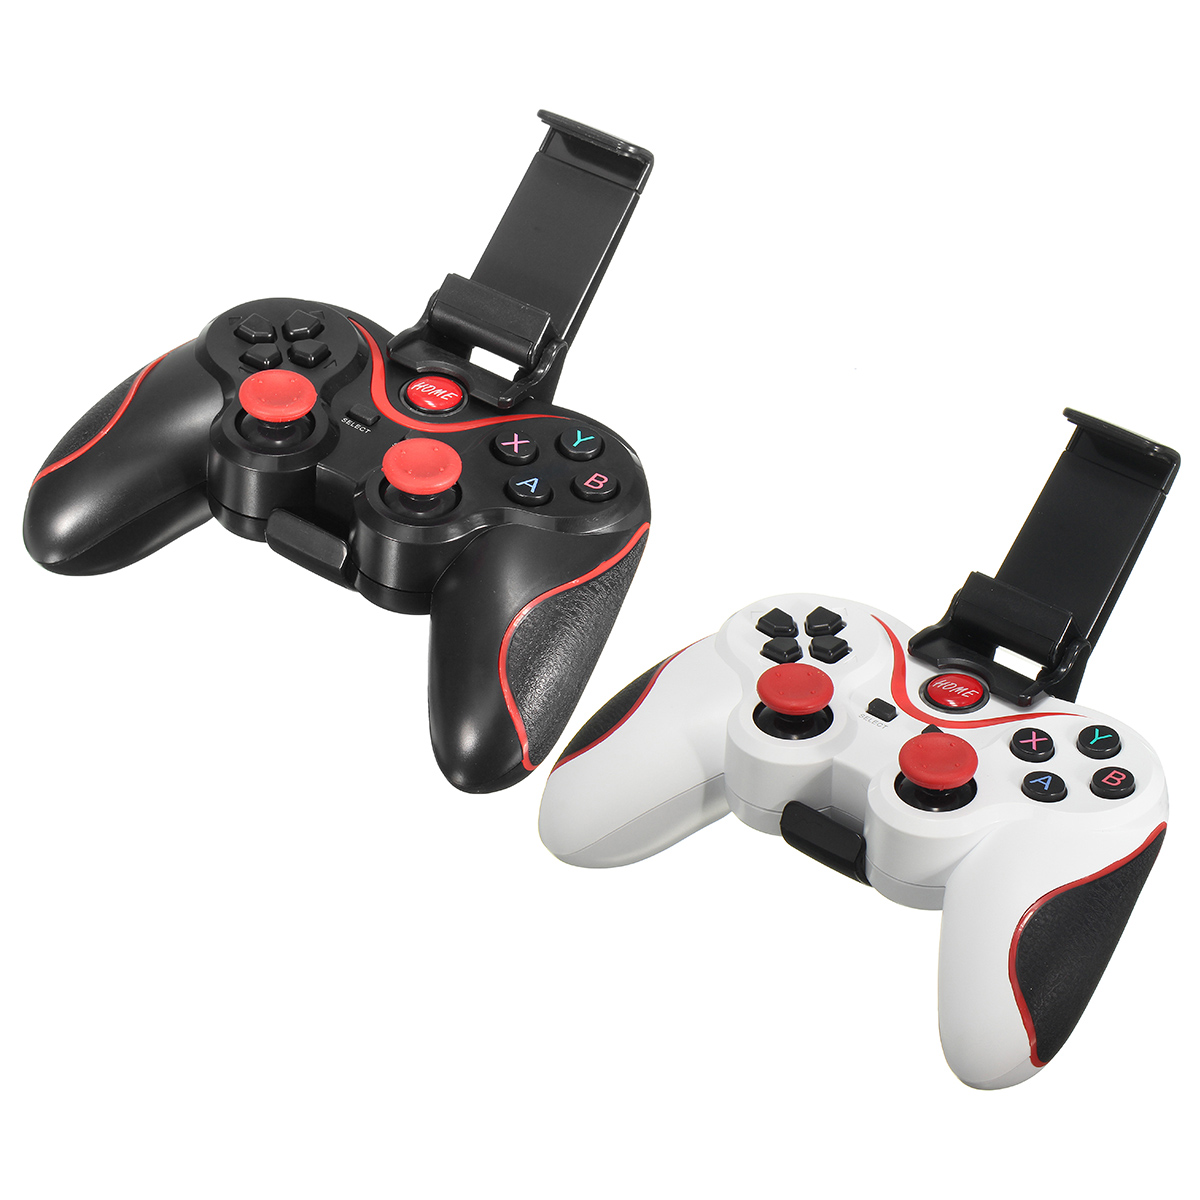 T3 Wireless Bluetooth Gamepad Gaming Controller For Android Smartphone Tablet PC